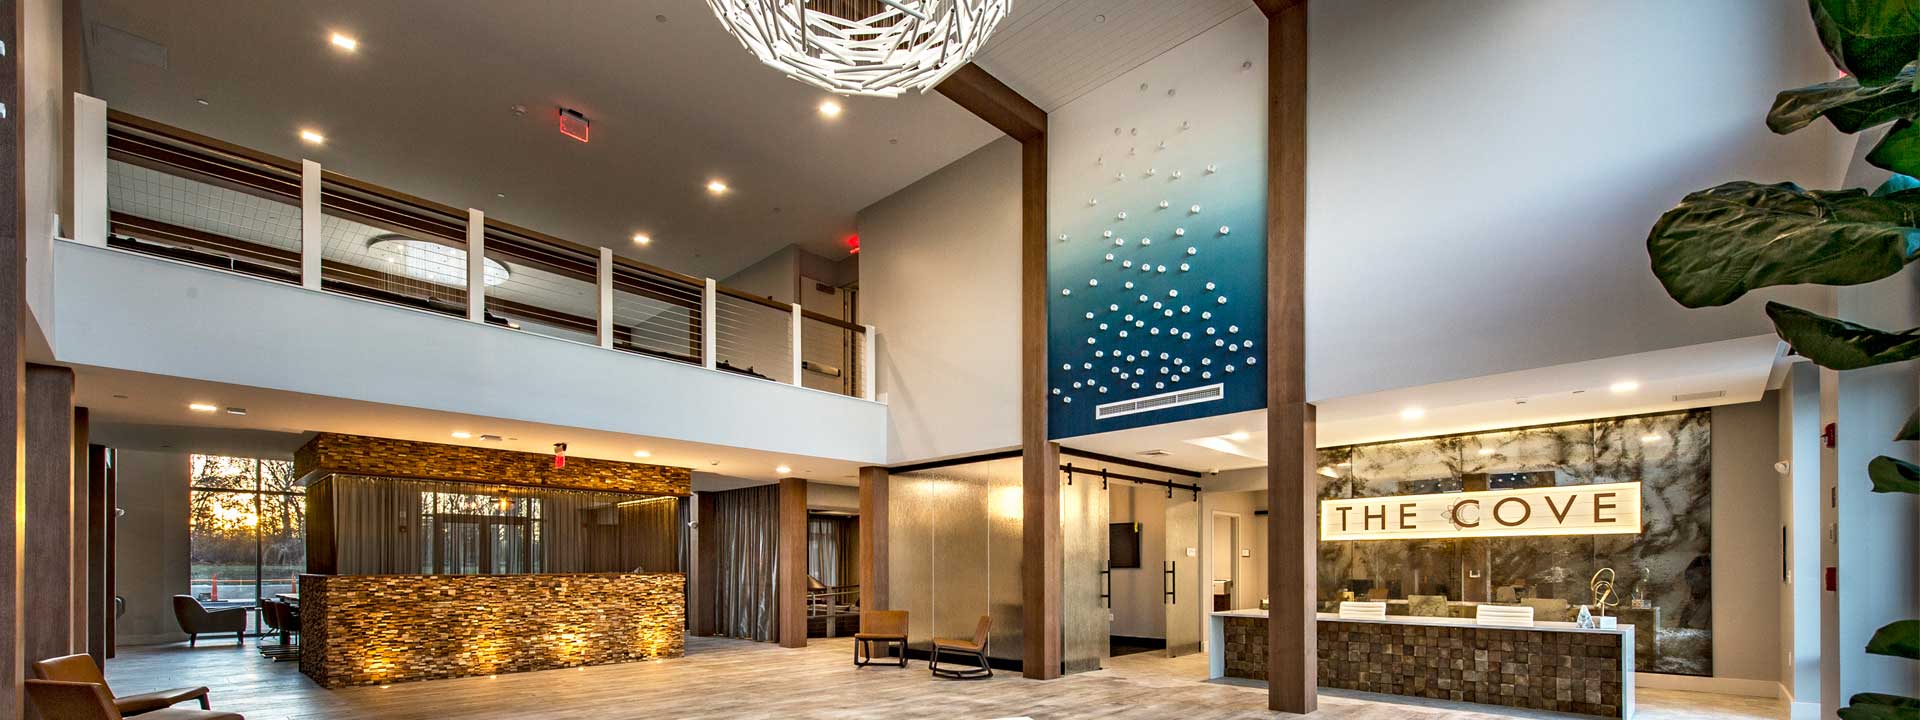 Large, open, modern lobby with an kind of ocean theme